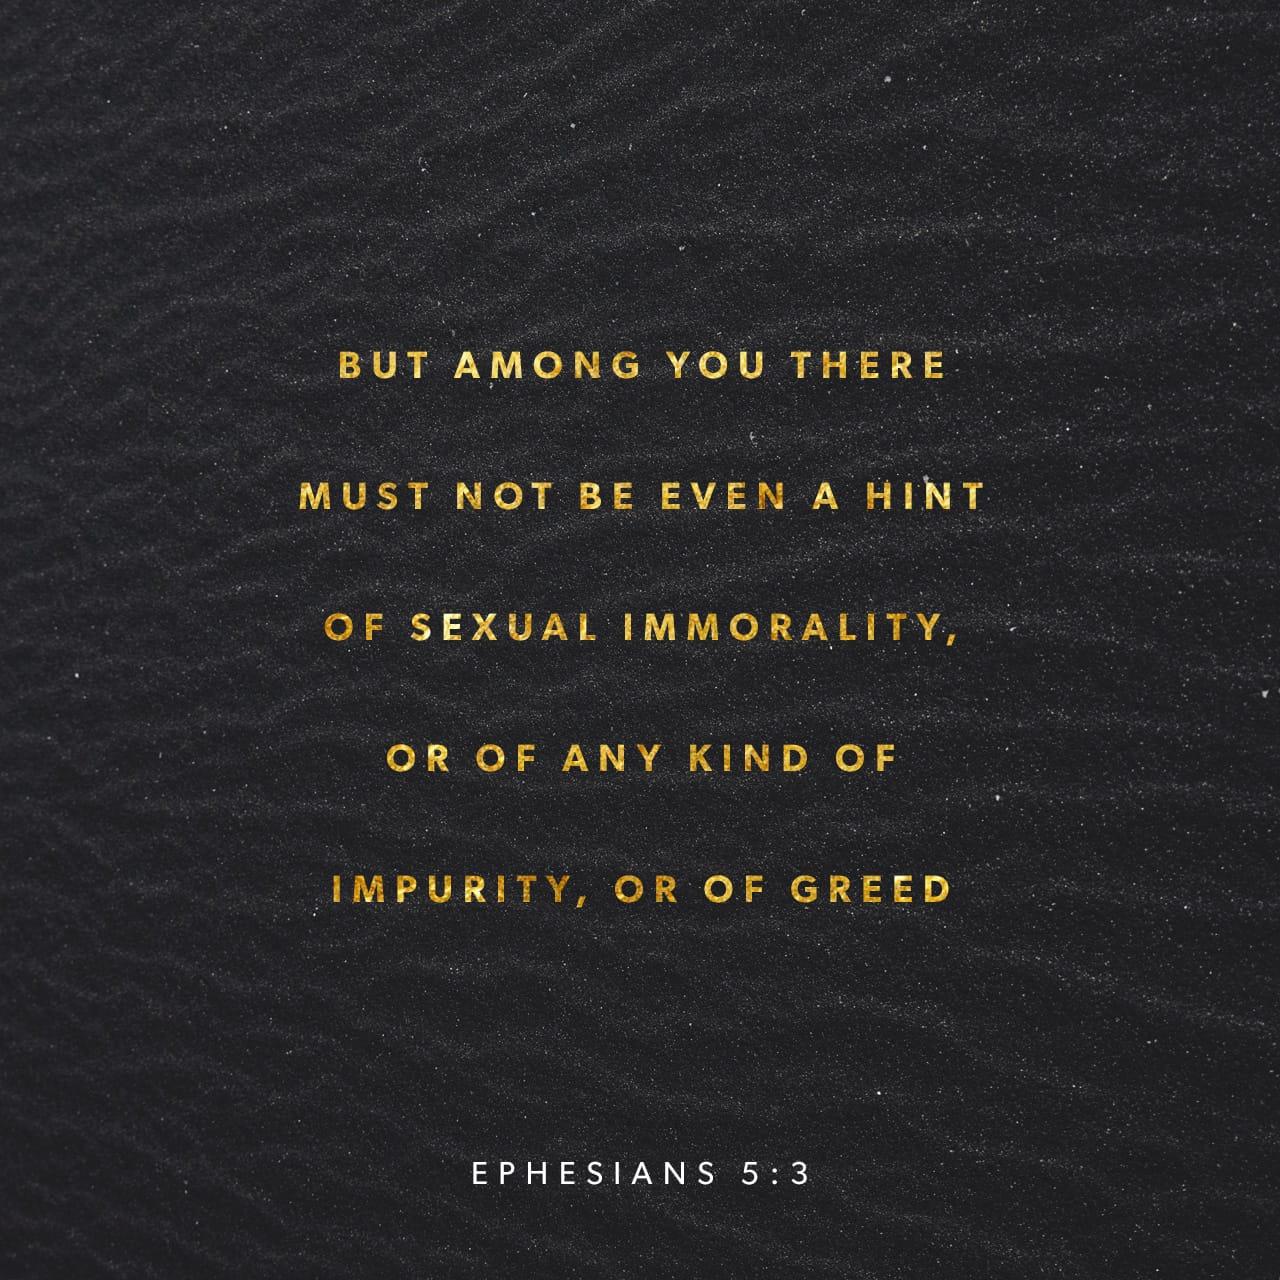 Bible Verse of the Day - day 153 - image 2274 (Ephesians 5:1-11)